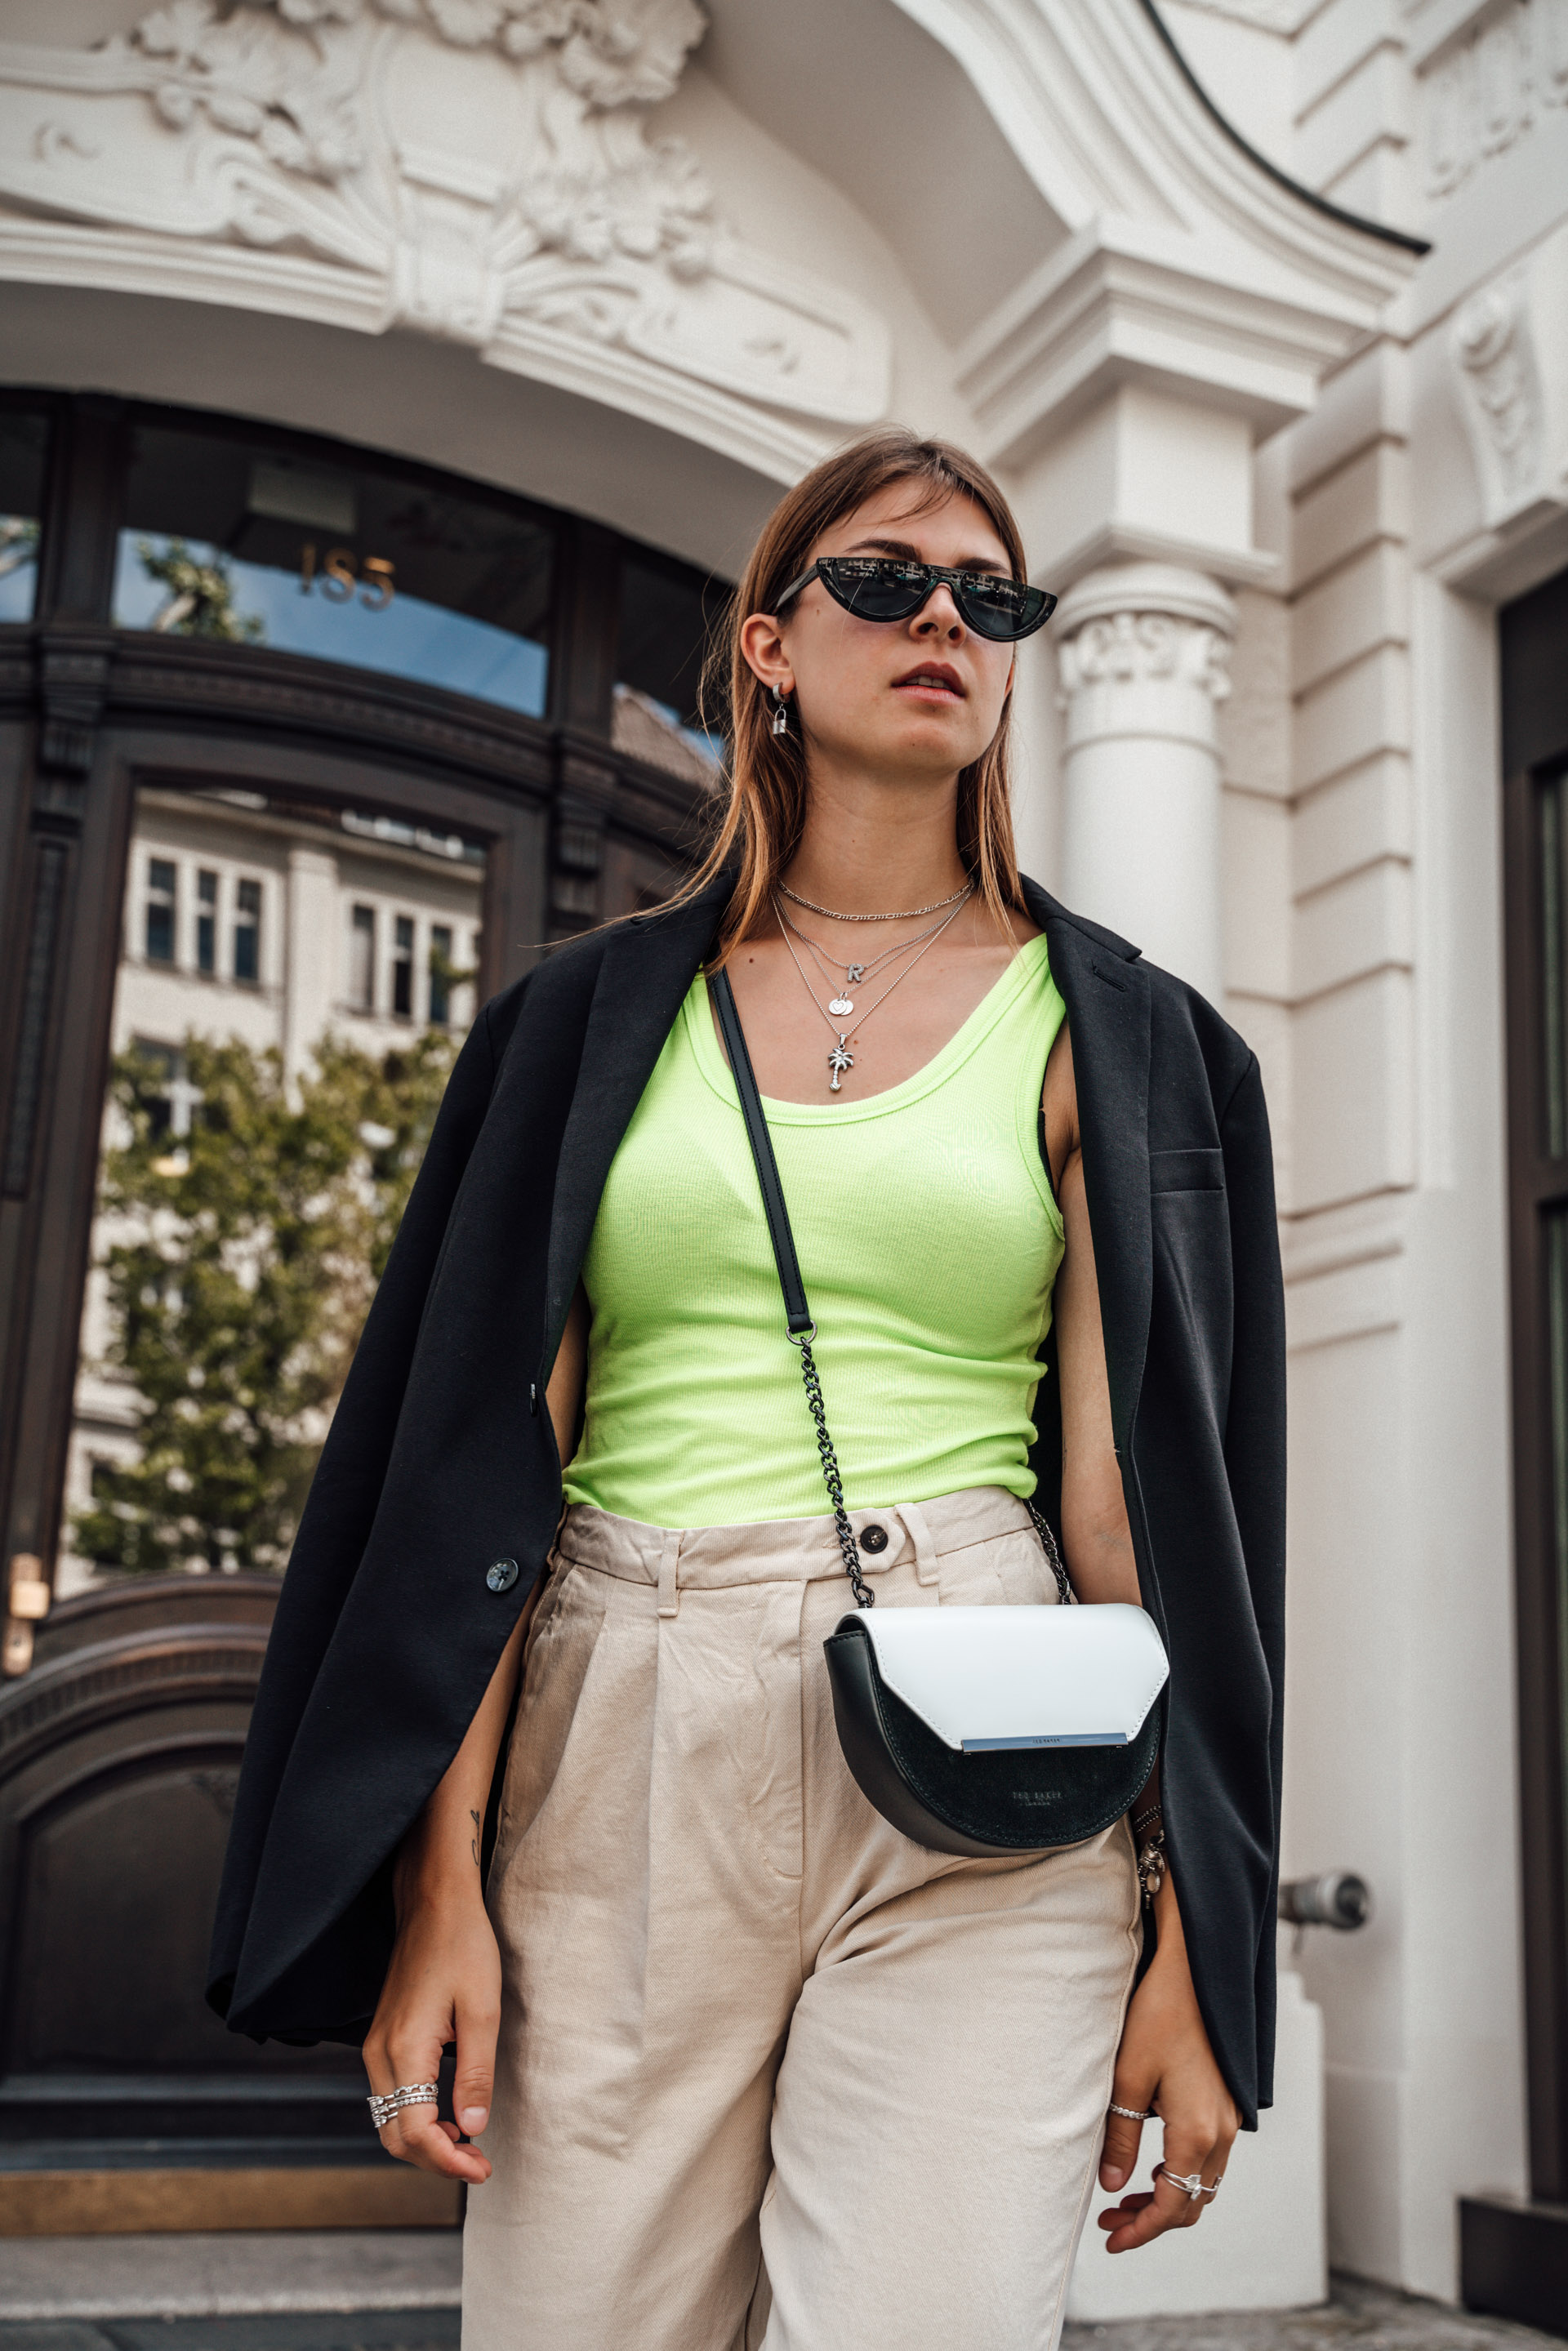 How to style a neon top in summer || Fashionblog Berlin